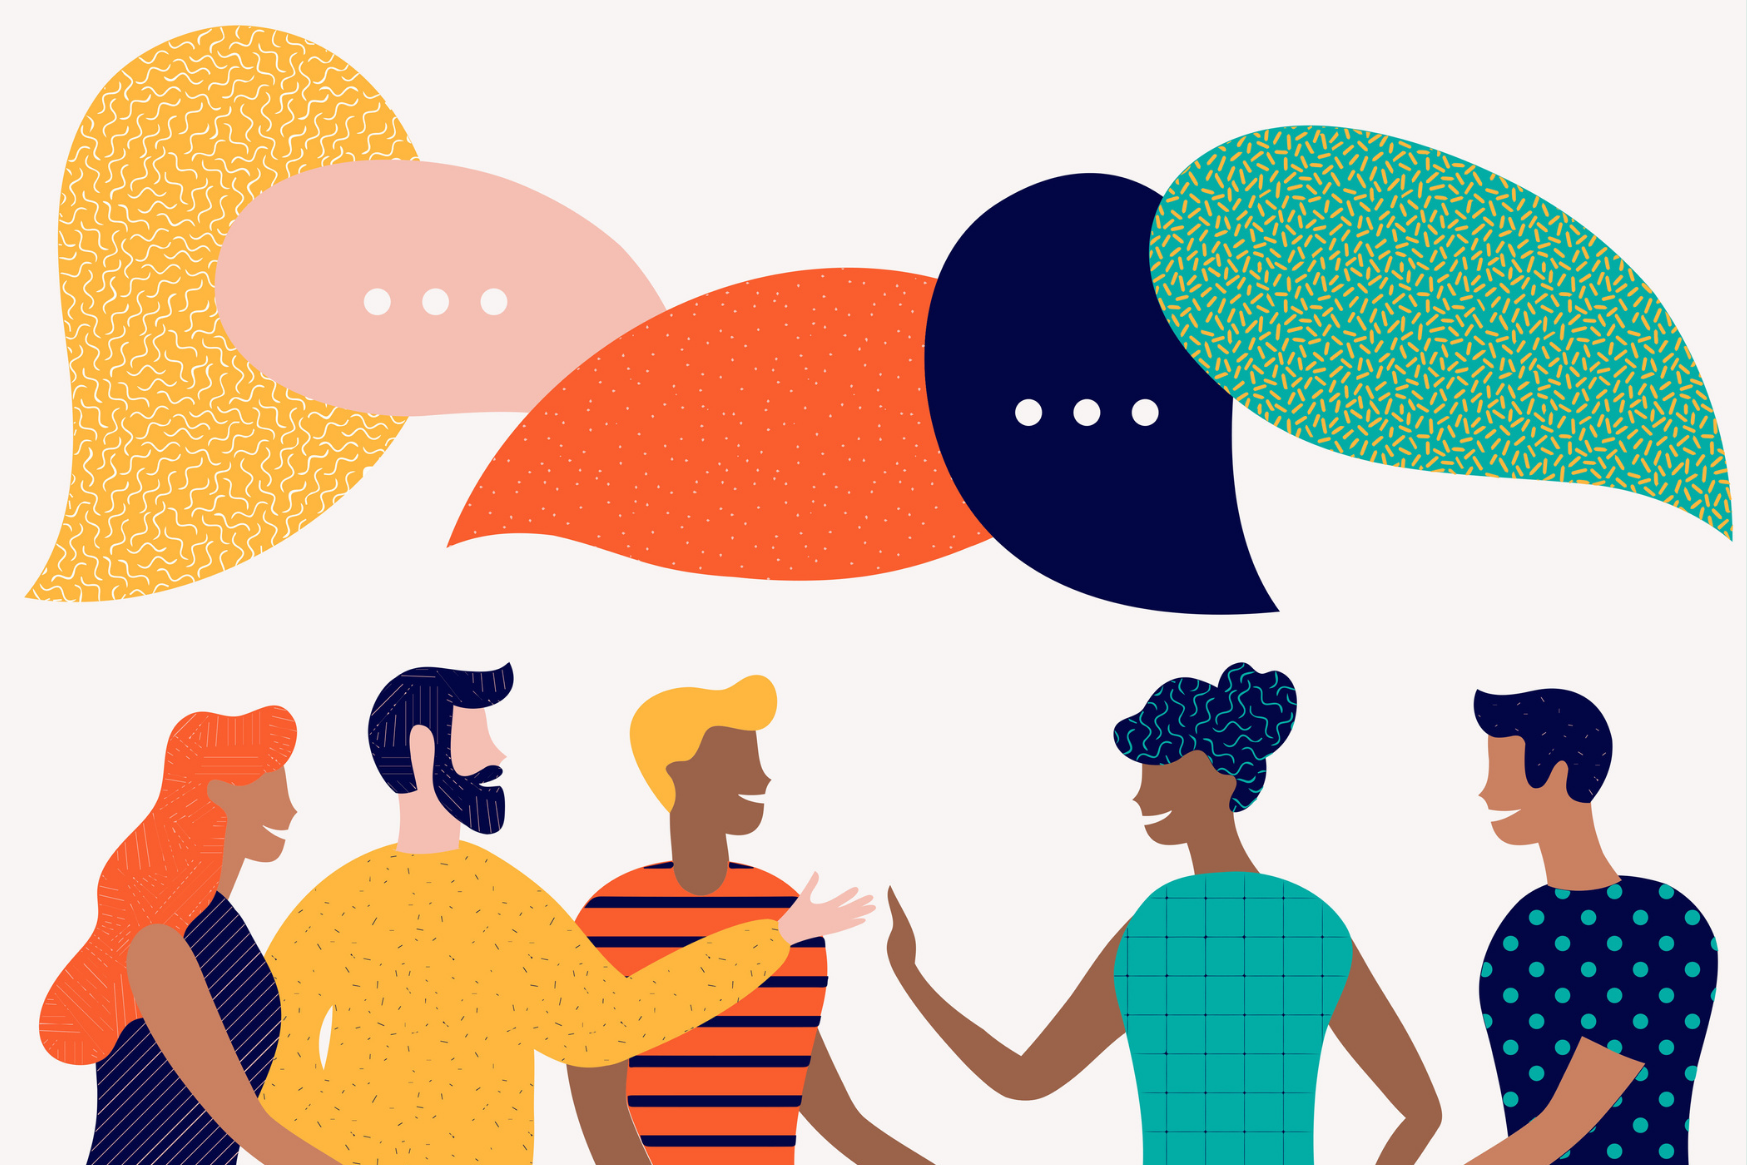 Colourful illustration of people and speech bubbles